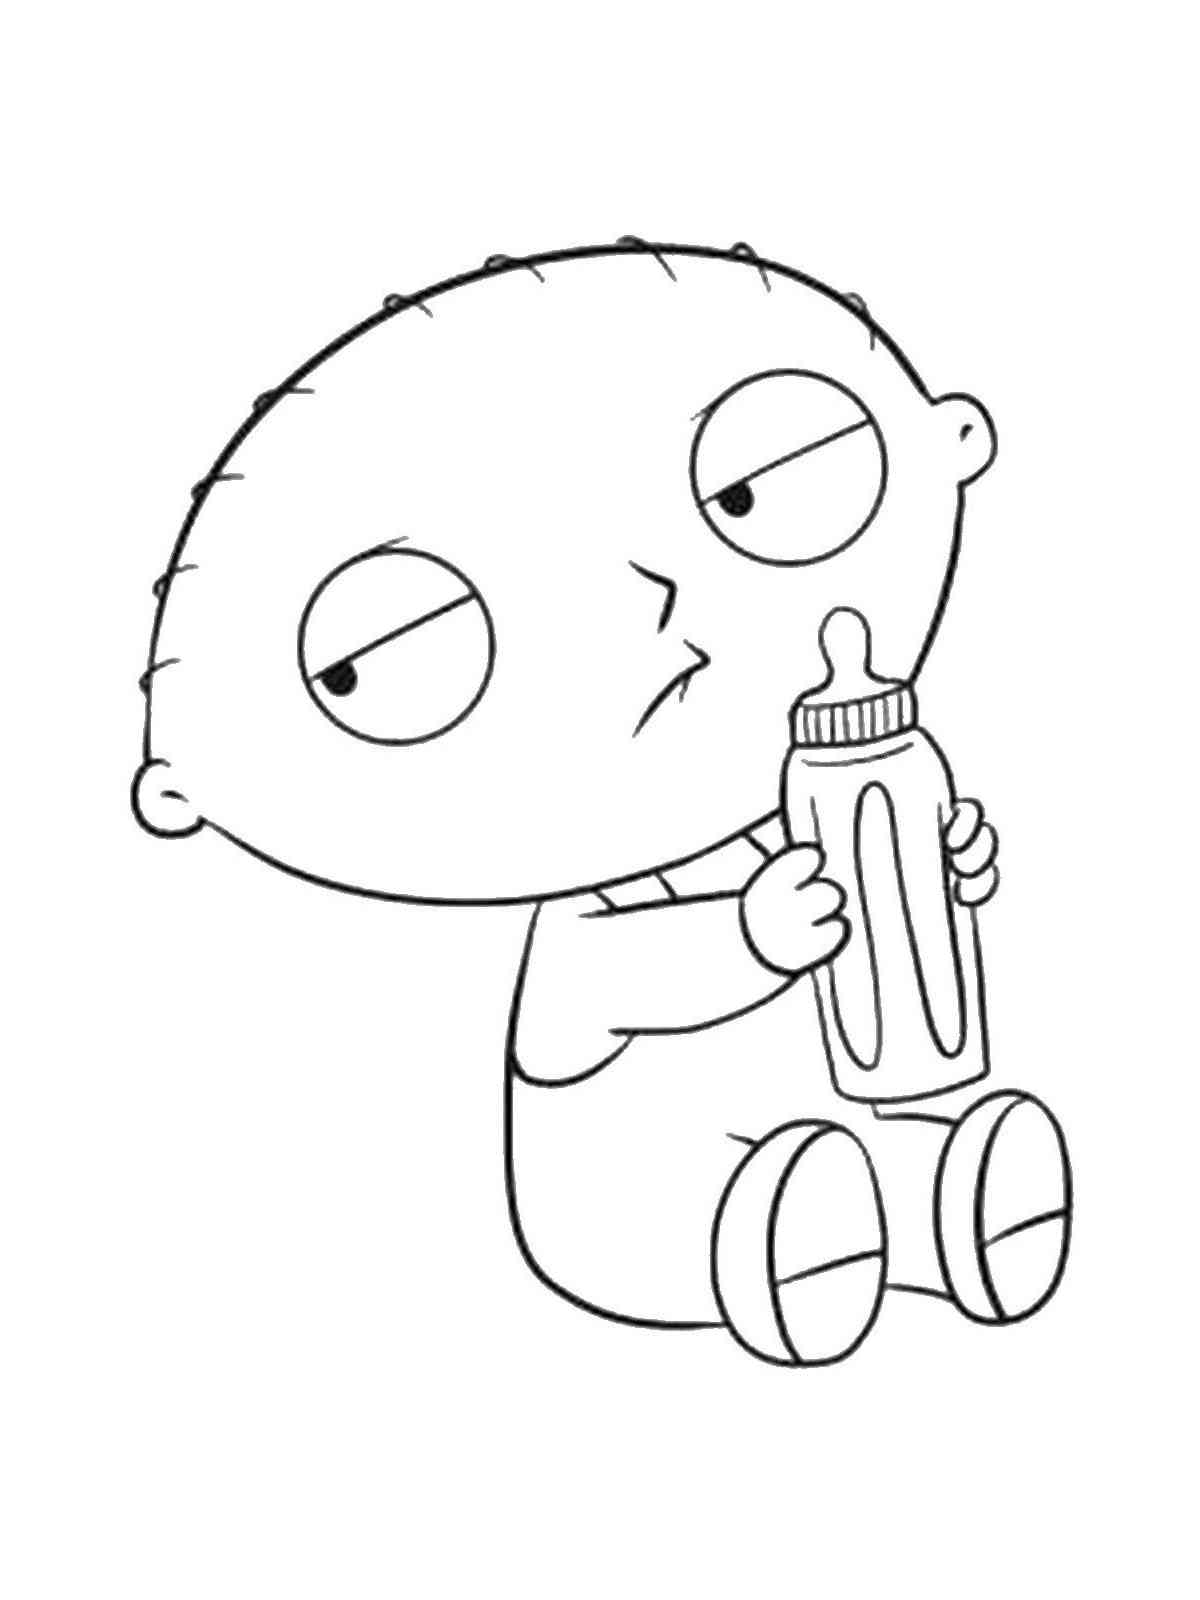 Family Guy 22 coloring page